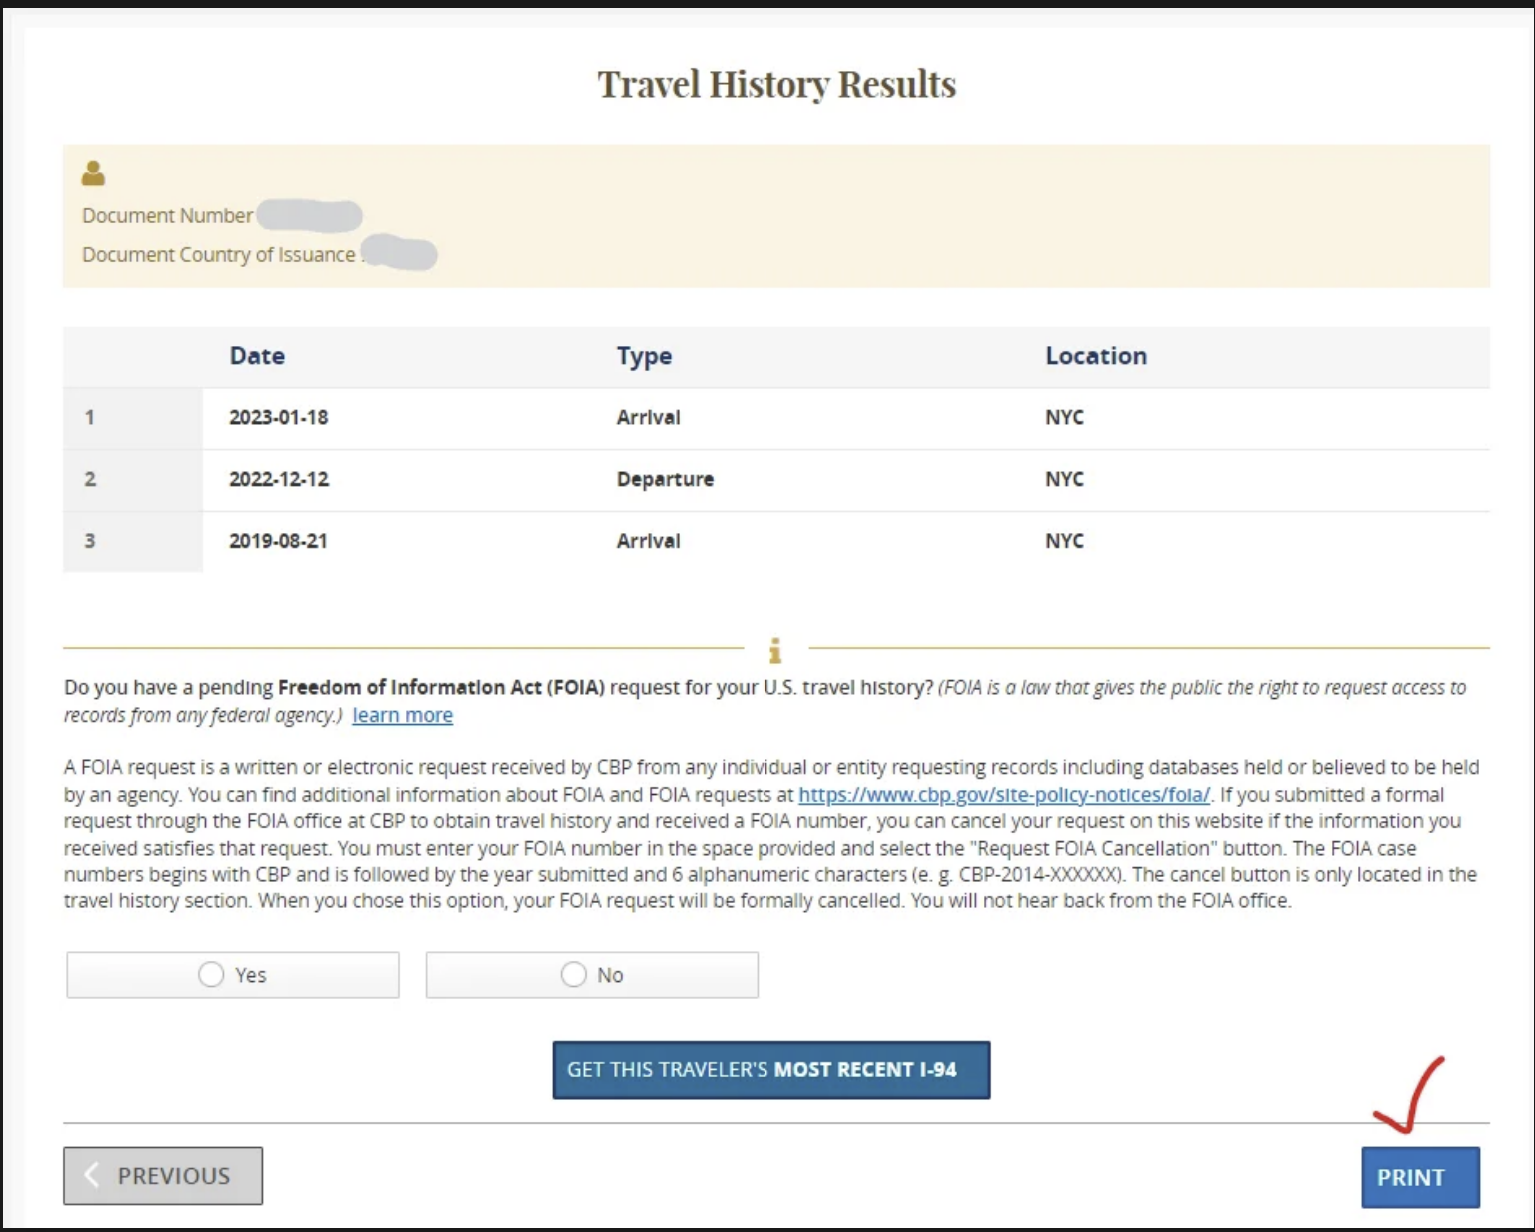 "Screenshot of the official U.S. Customs and Border Protection I-94 website with options to apply for a new I-94, get the most recent I-94, view travel history, and save it..